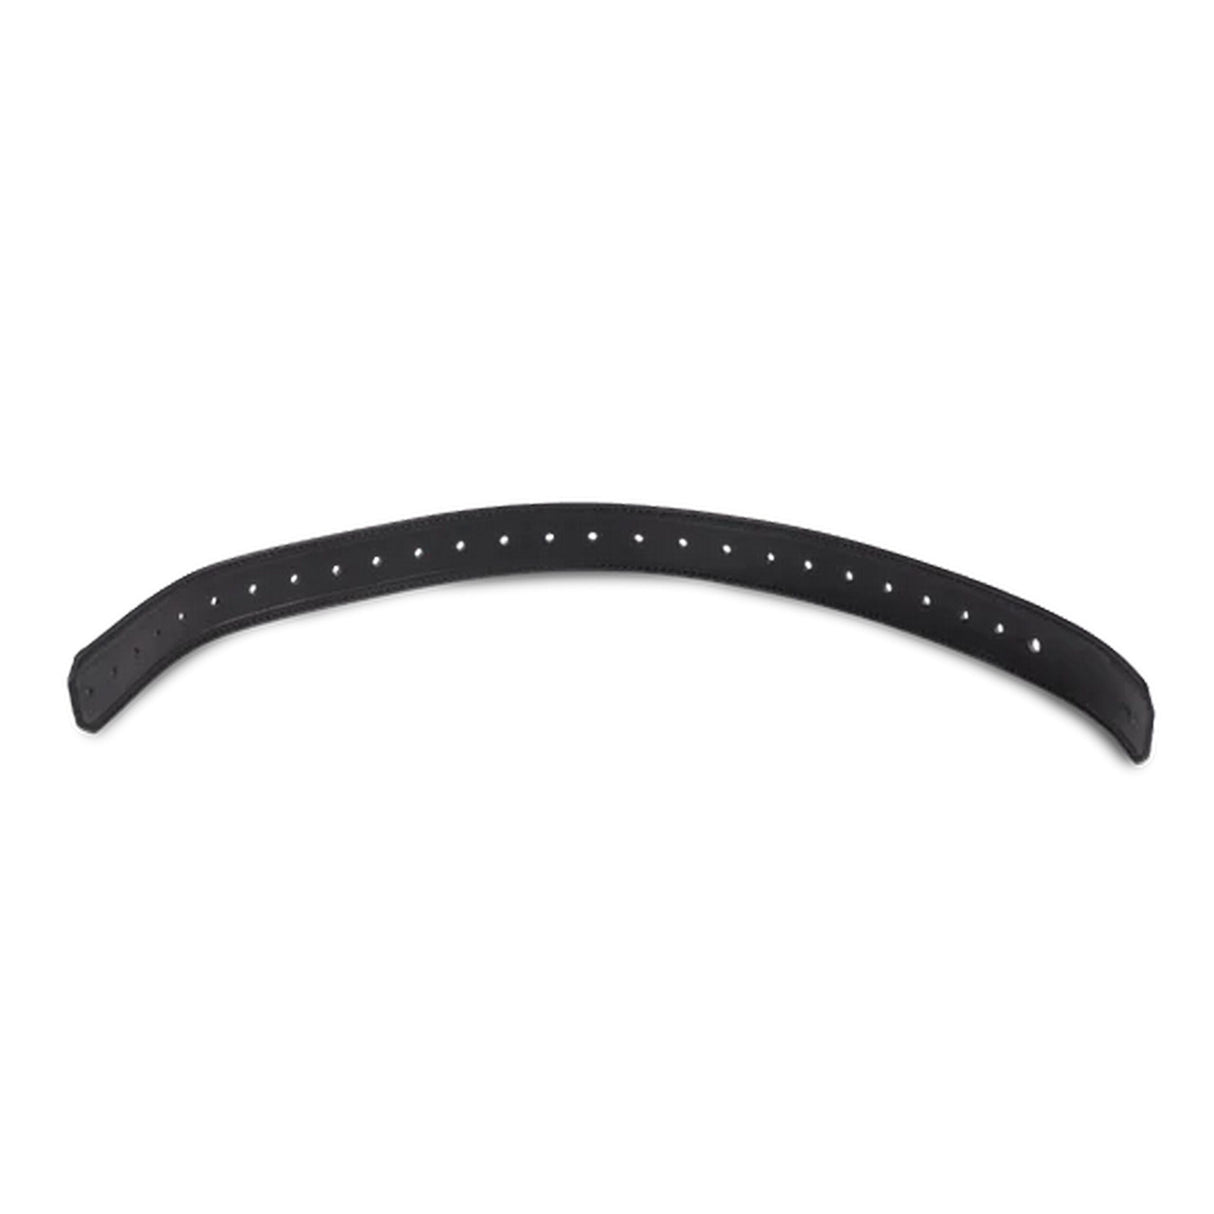 Gruv Gear LTH-XLT-BLK Extra Long Leather Tail for SoloStrap, Black